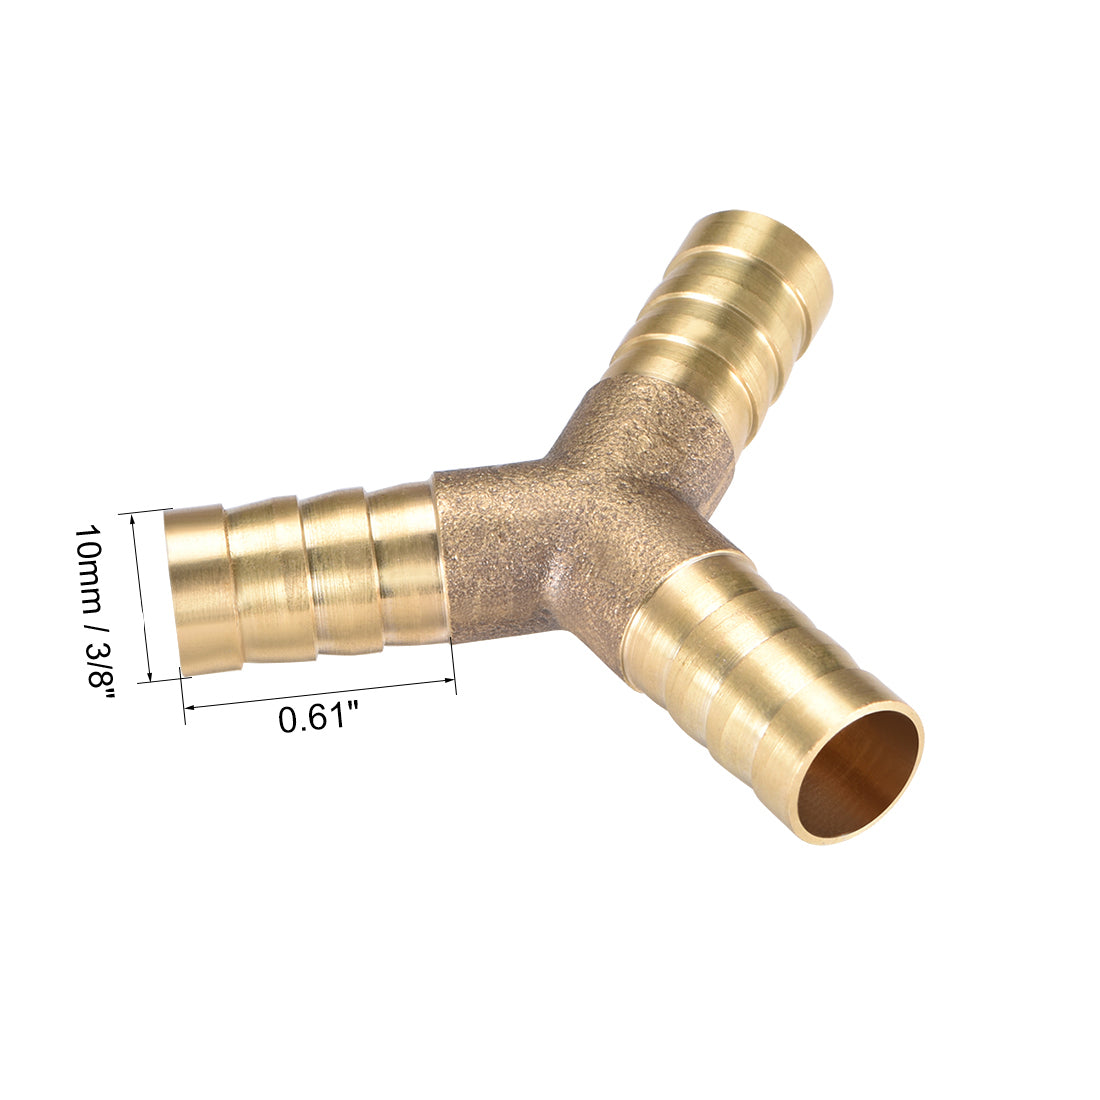 Uxcell Uxcell 12mm or 1/2" ID Brass Barb Splicer Fitting,Y-Shaped 3Way,Barb Hose Fitting,2pcs